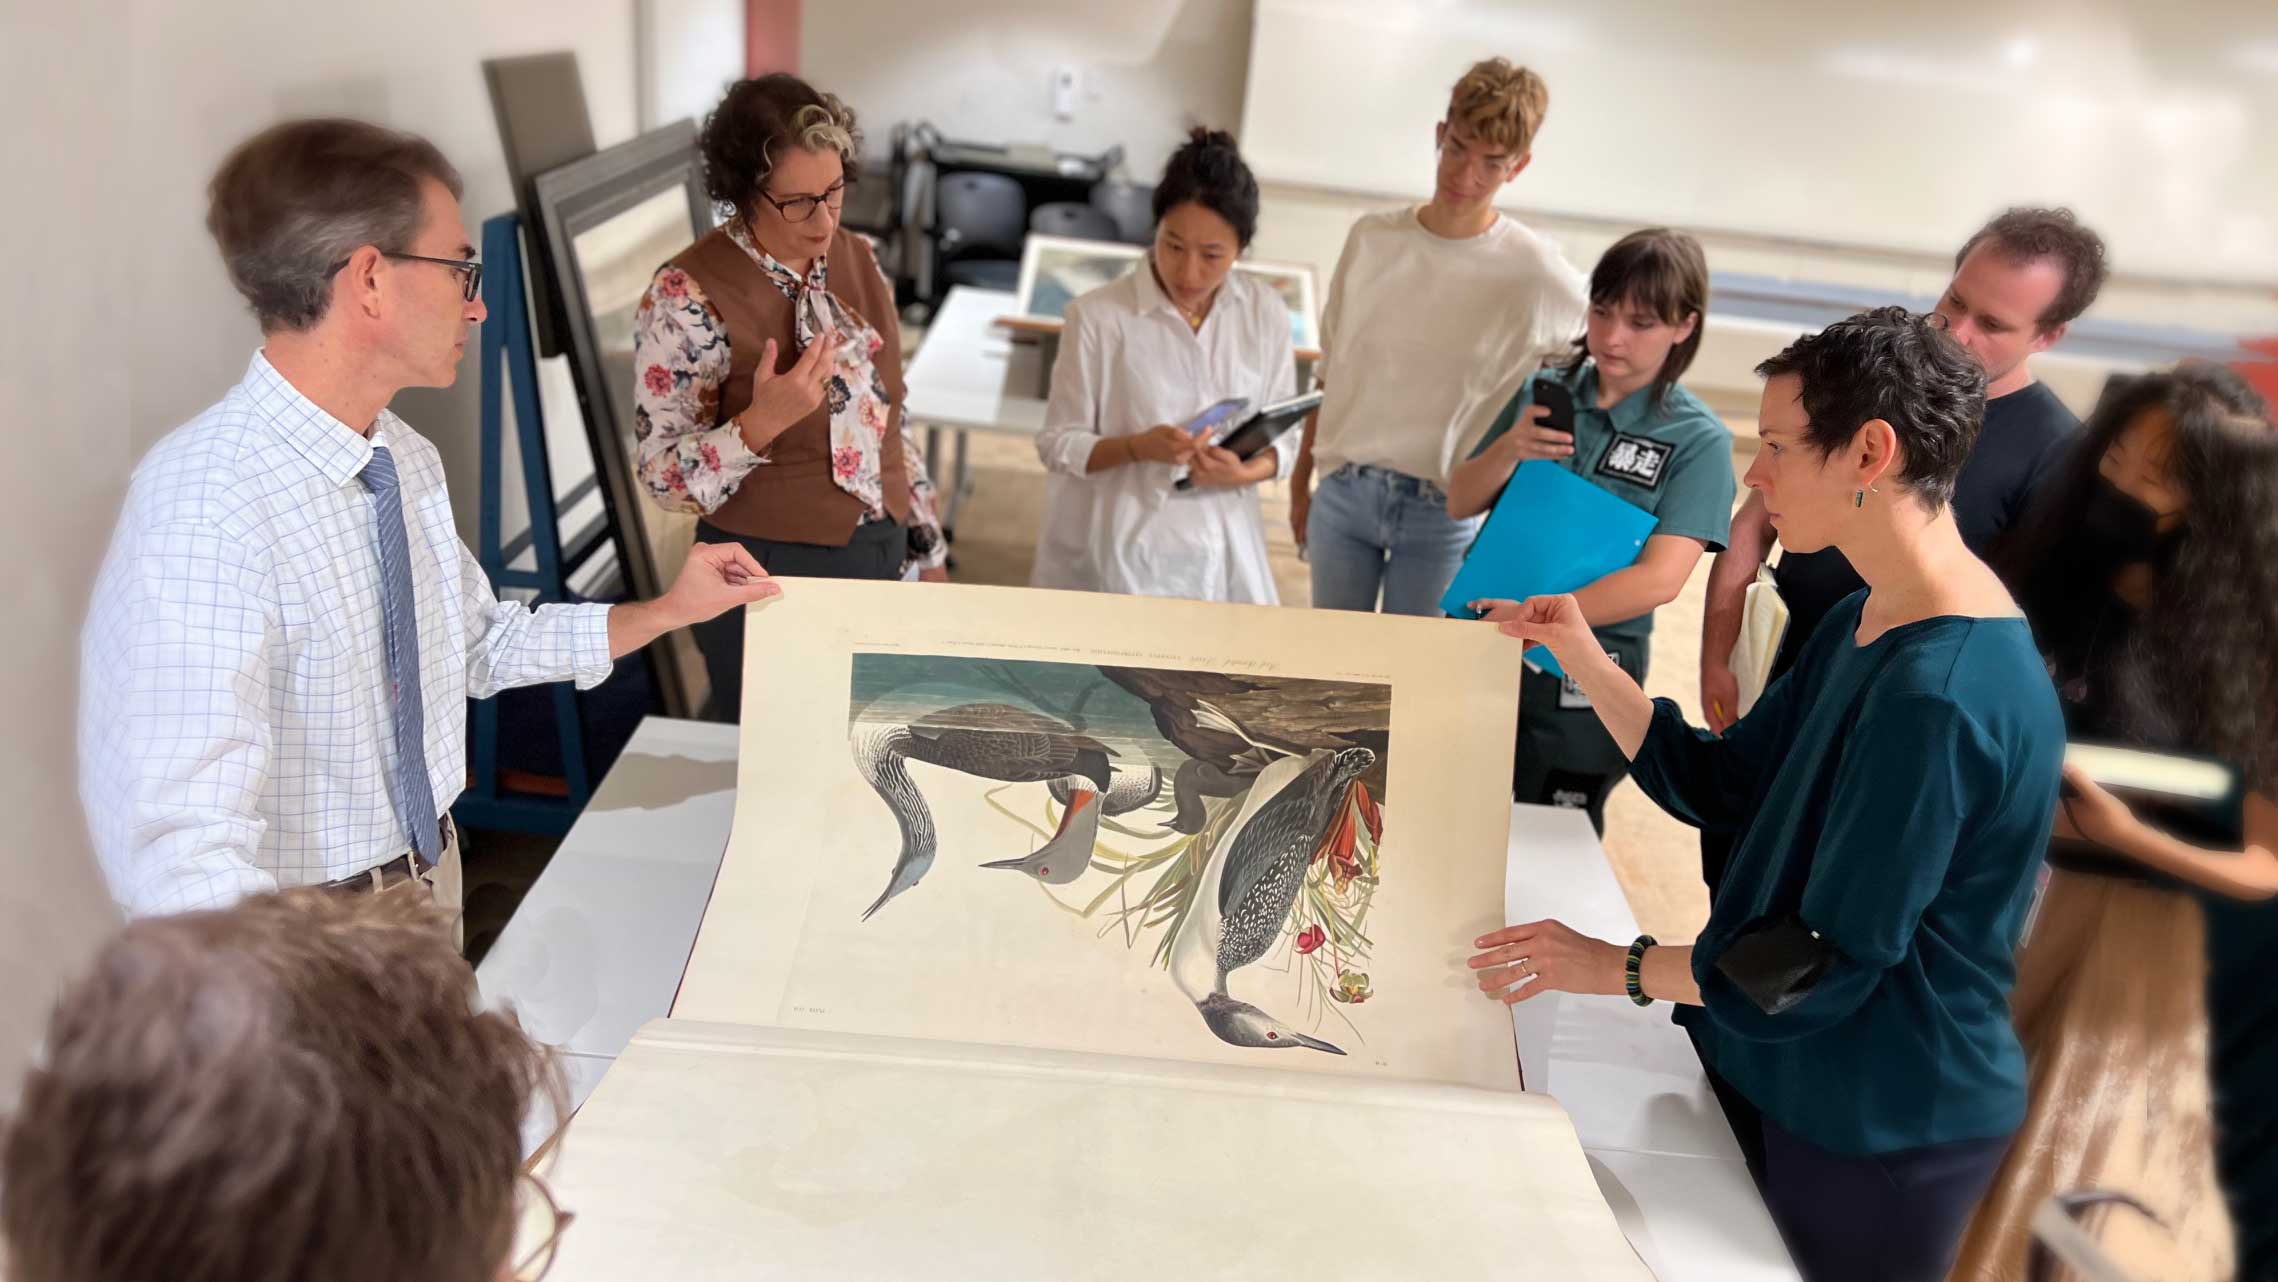 How art by Audubon, Darwin and others influenced science Insights from a Princeton course picture